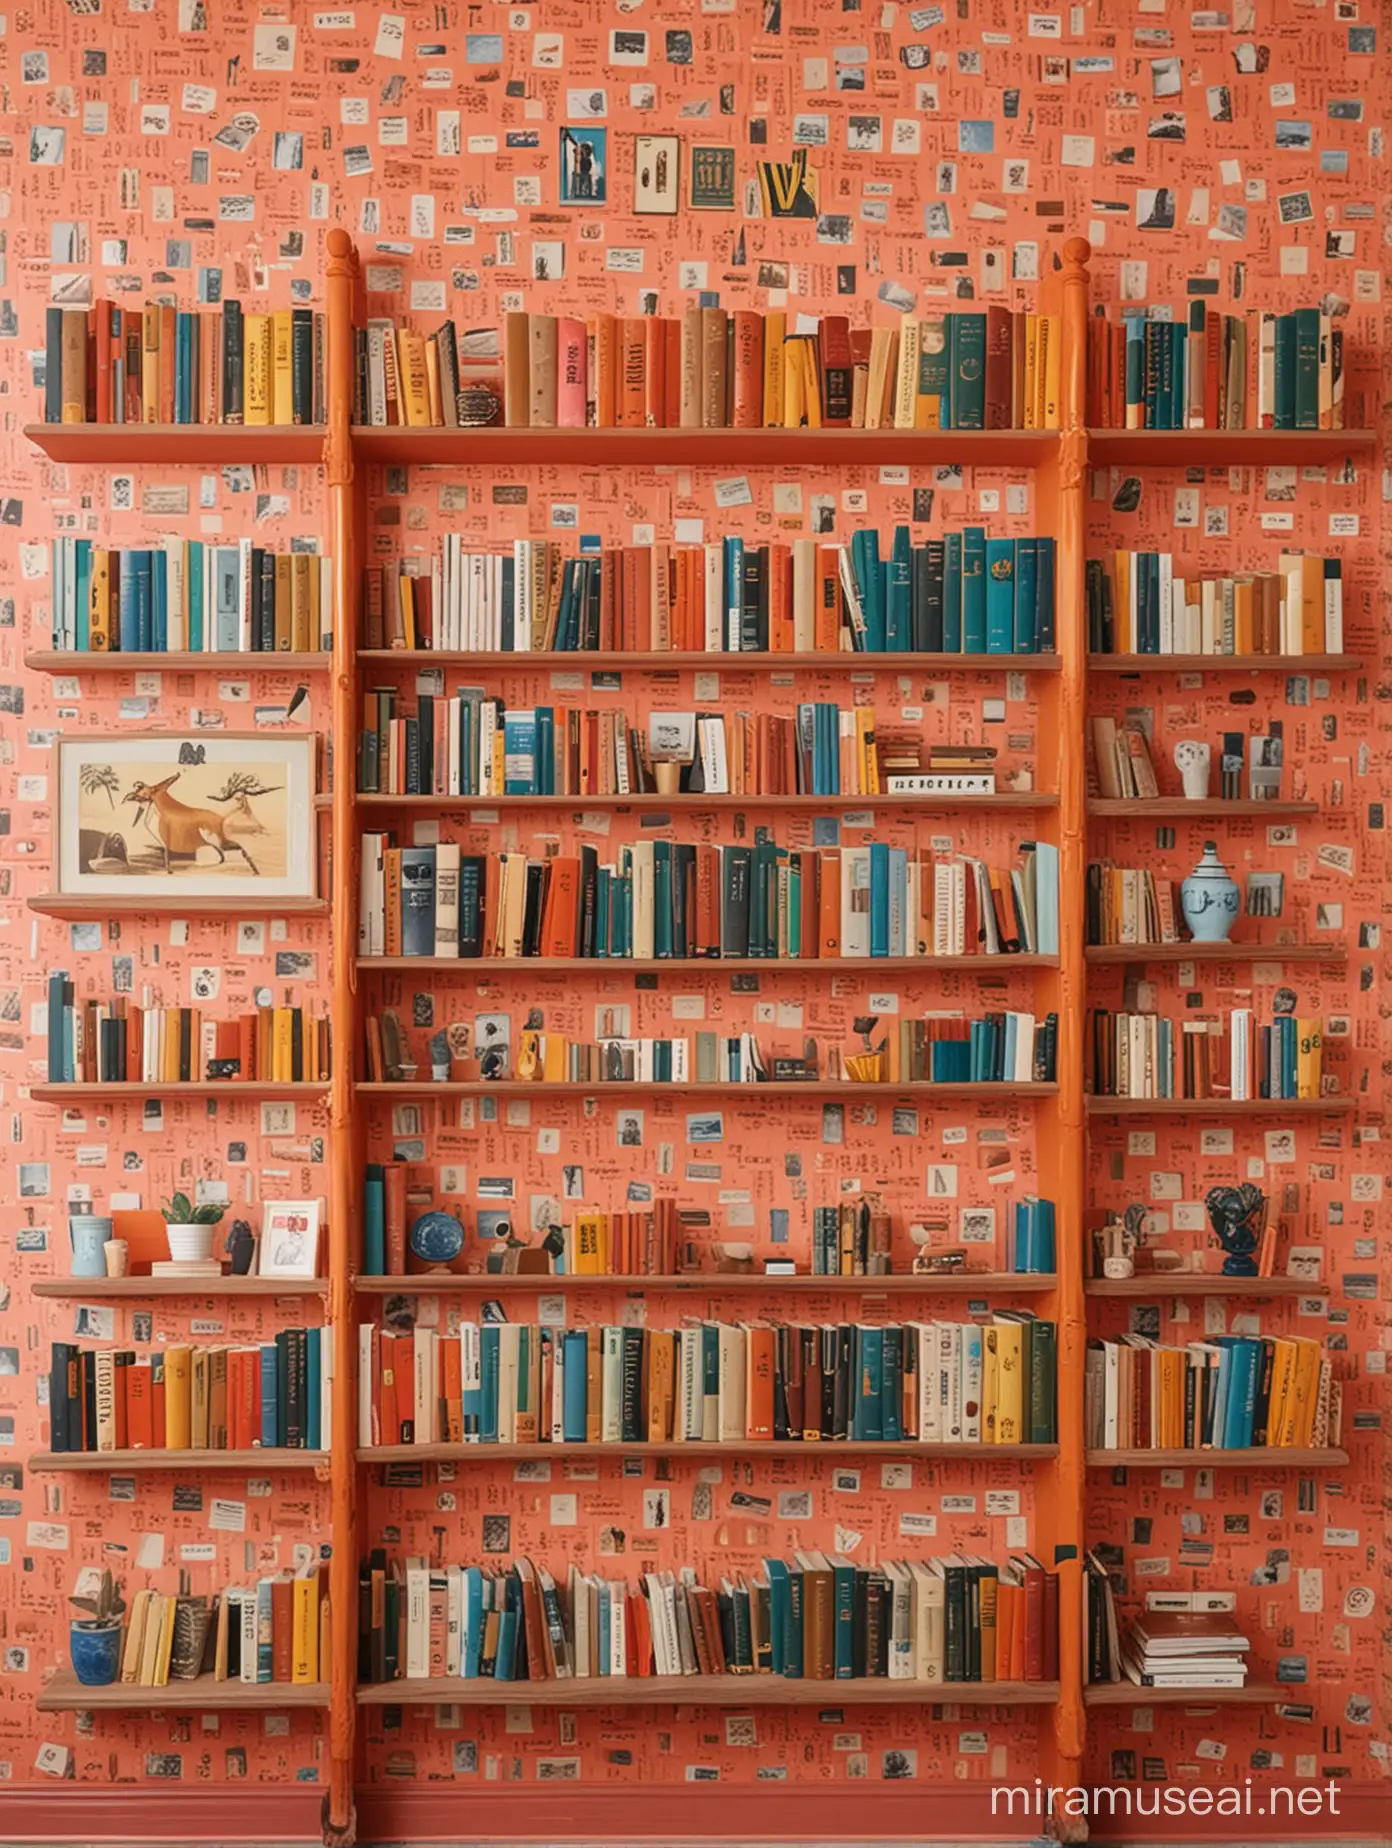 Wes Anderson Style Wall with Books Quirky Interior Design Featuring Stylized Dcor and Books Arranged in Symmetrical Harmony